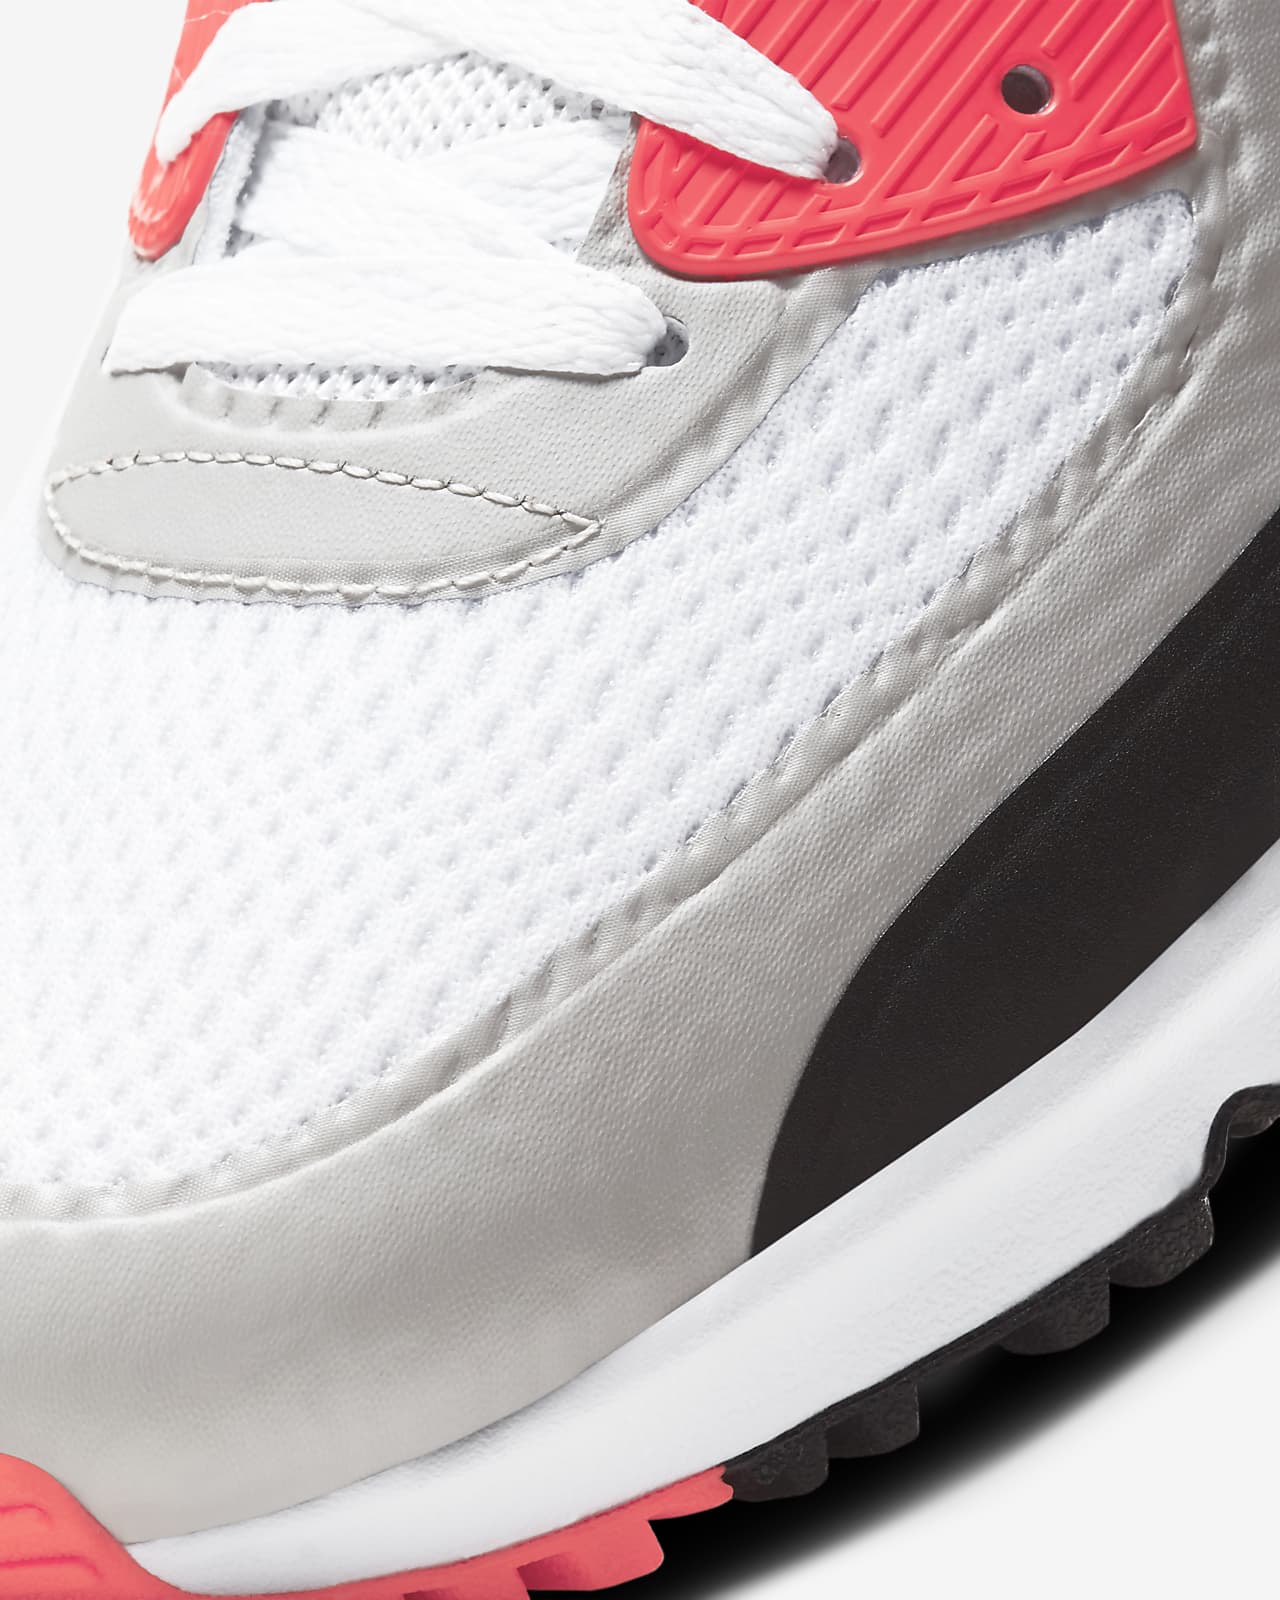 are nike air max 90 good for wide feet